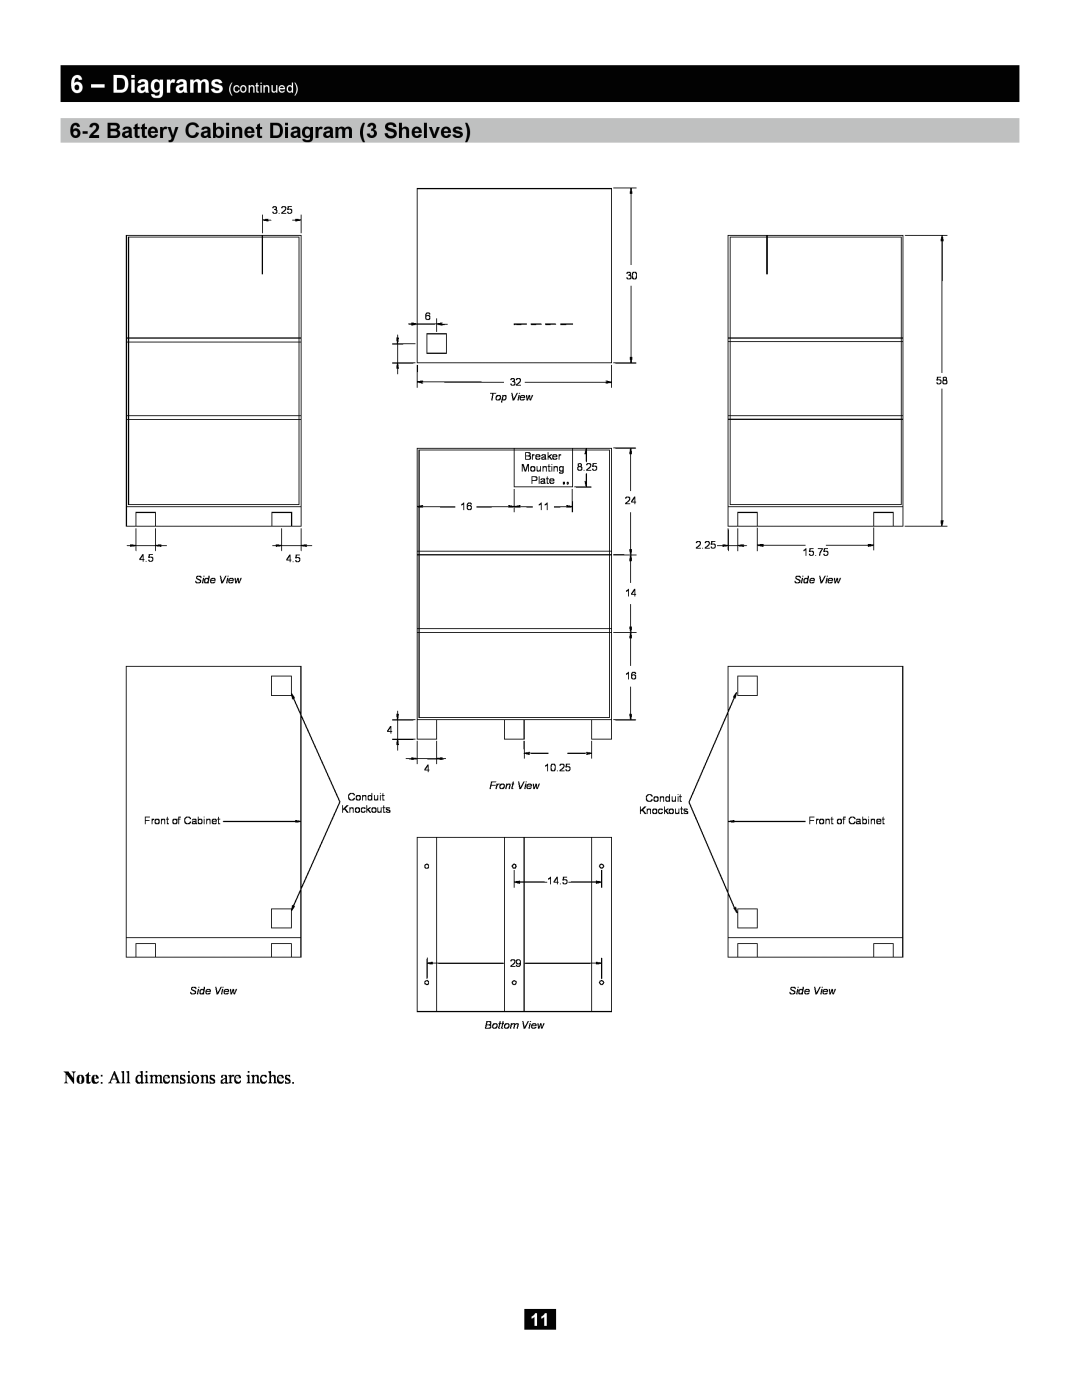 Tripp Lite Extended-Run 3-Phase Battery Cabinet Diagrams continued, Battery Cabinet Diagram 3 Shelves, Top View, Side View 